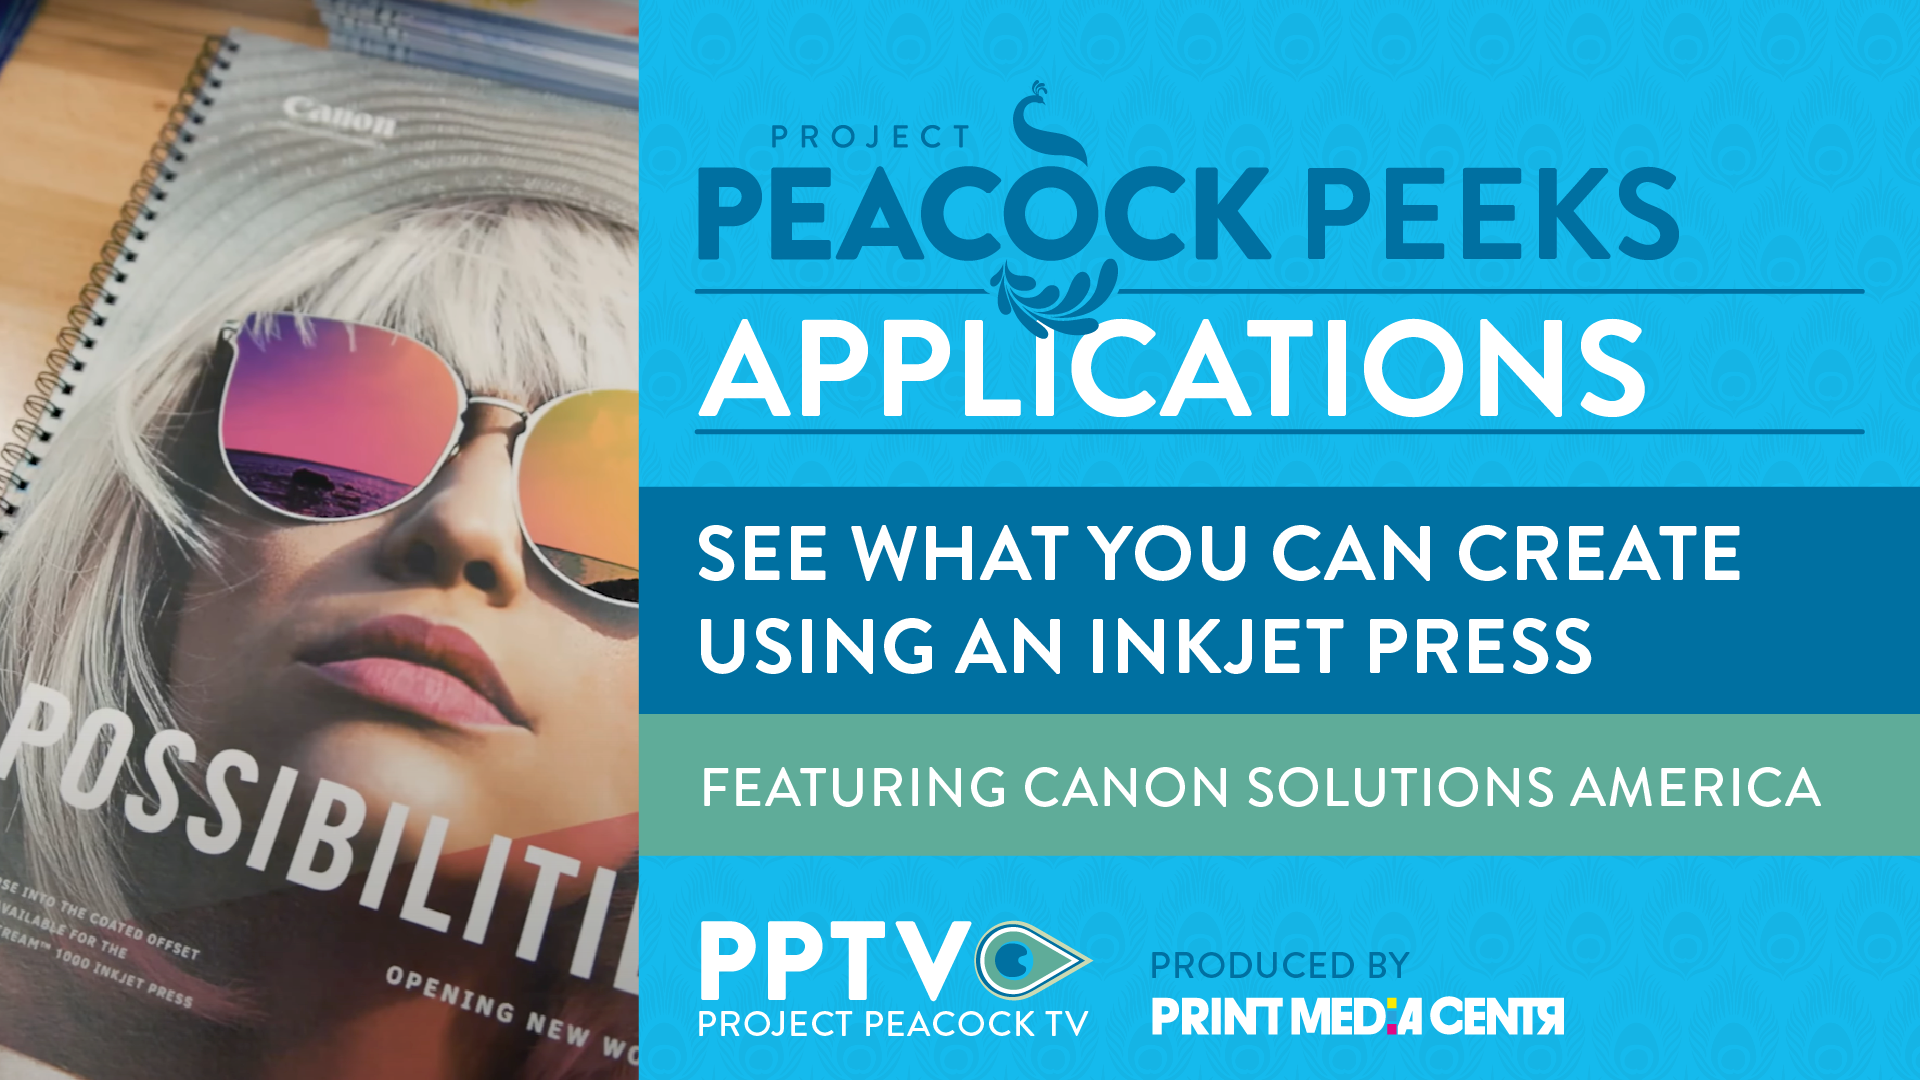 Level Up Your Print Campaigns and Expand Your Print Possibilities Through Inkjet Printing